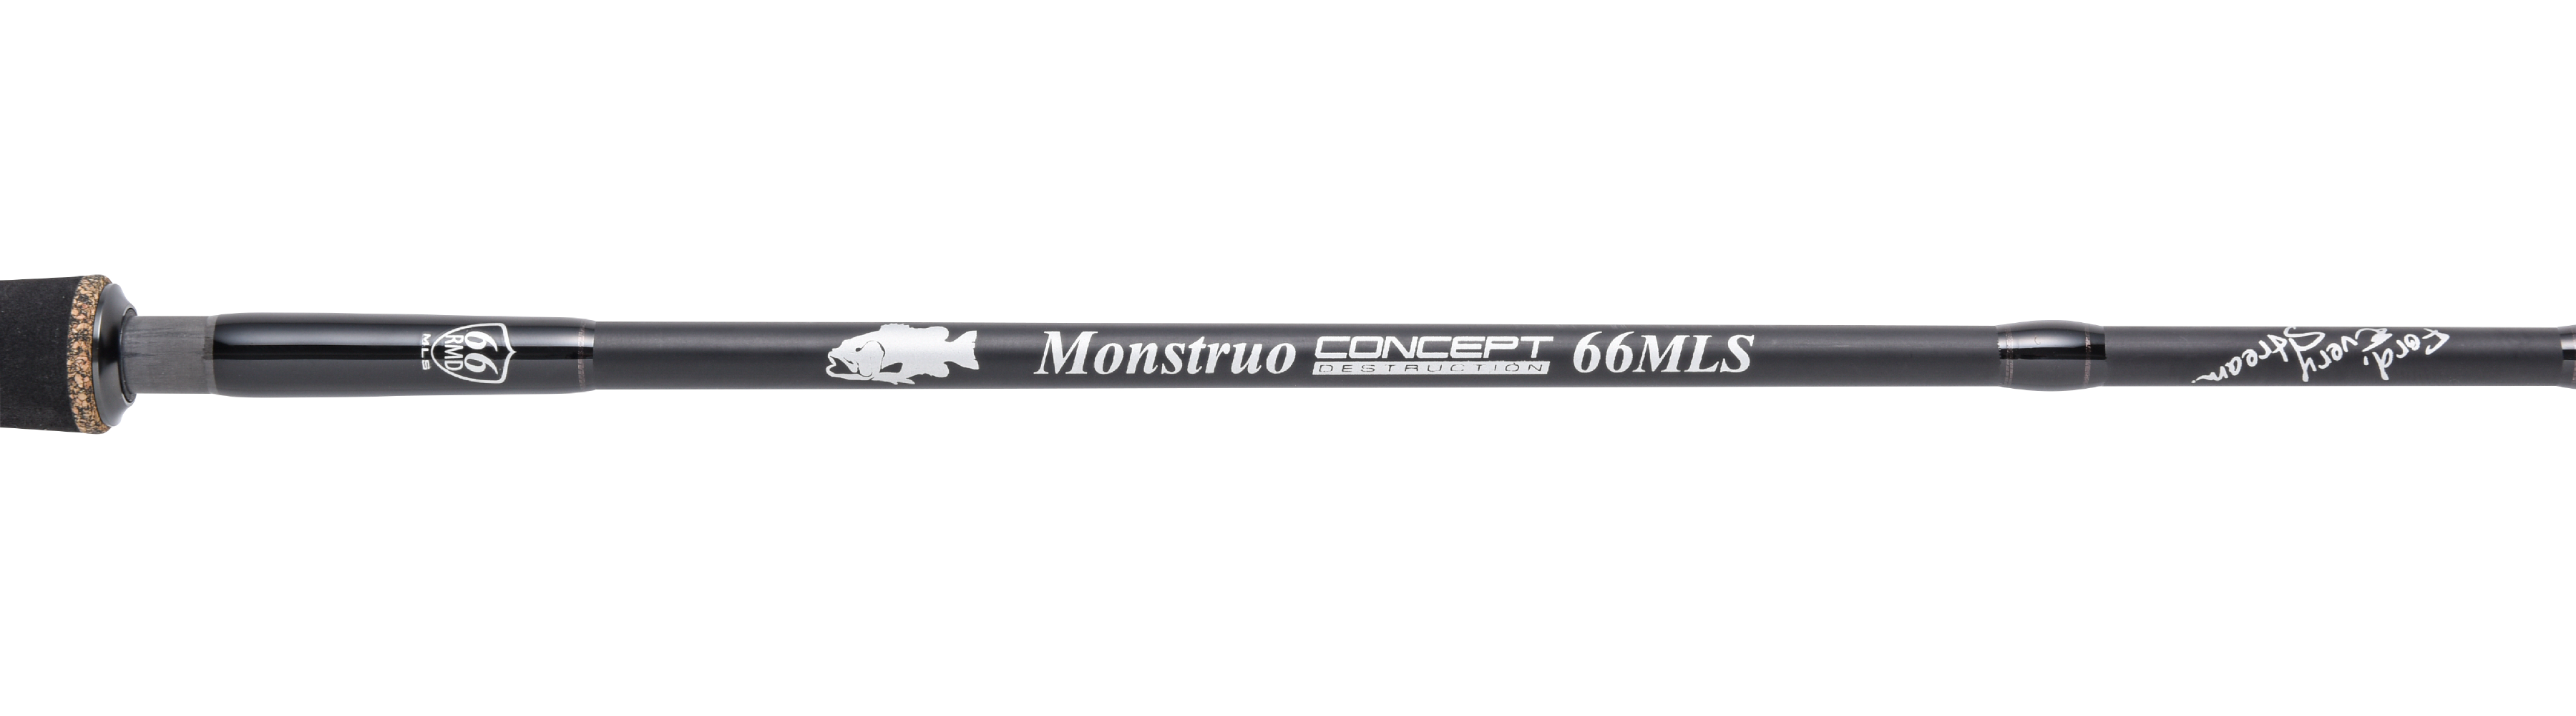 TULALA | Ford every stream | » Monstruo”ConceptDestruction” 66MLS